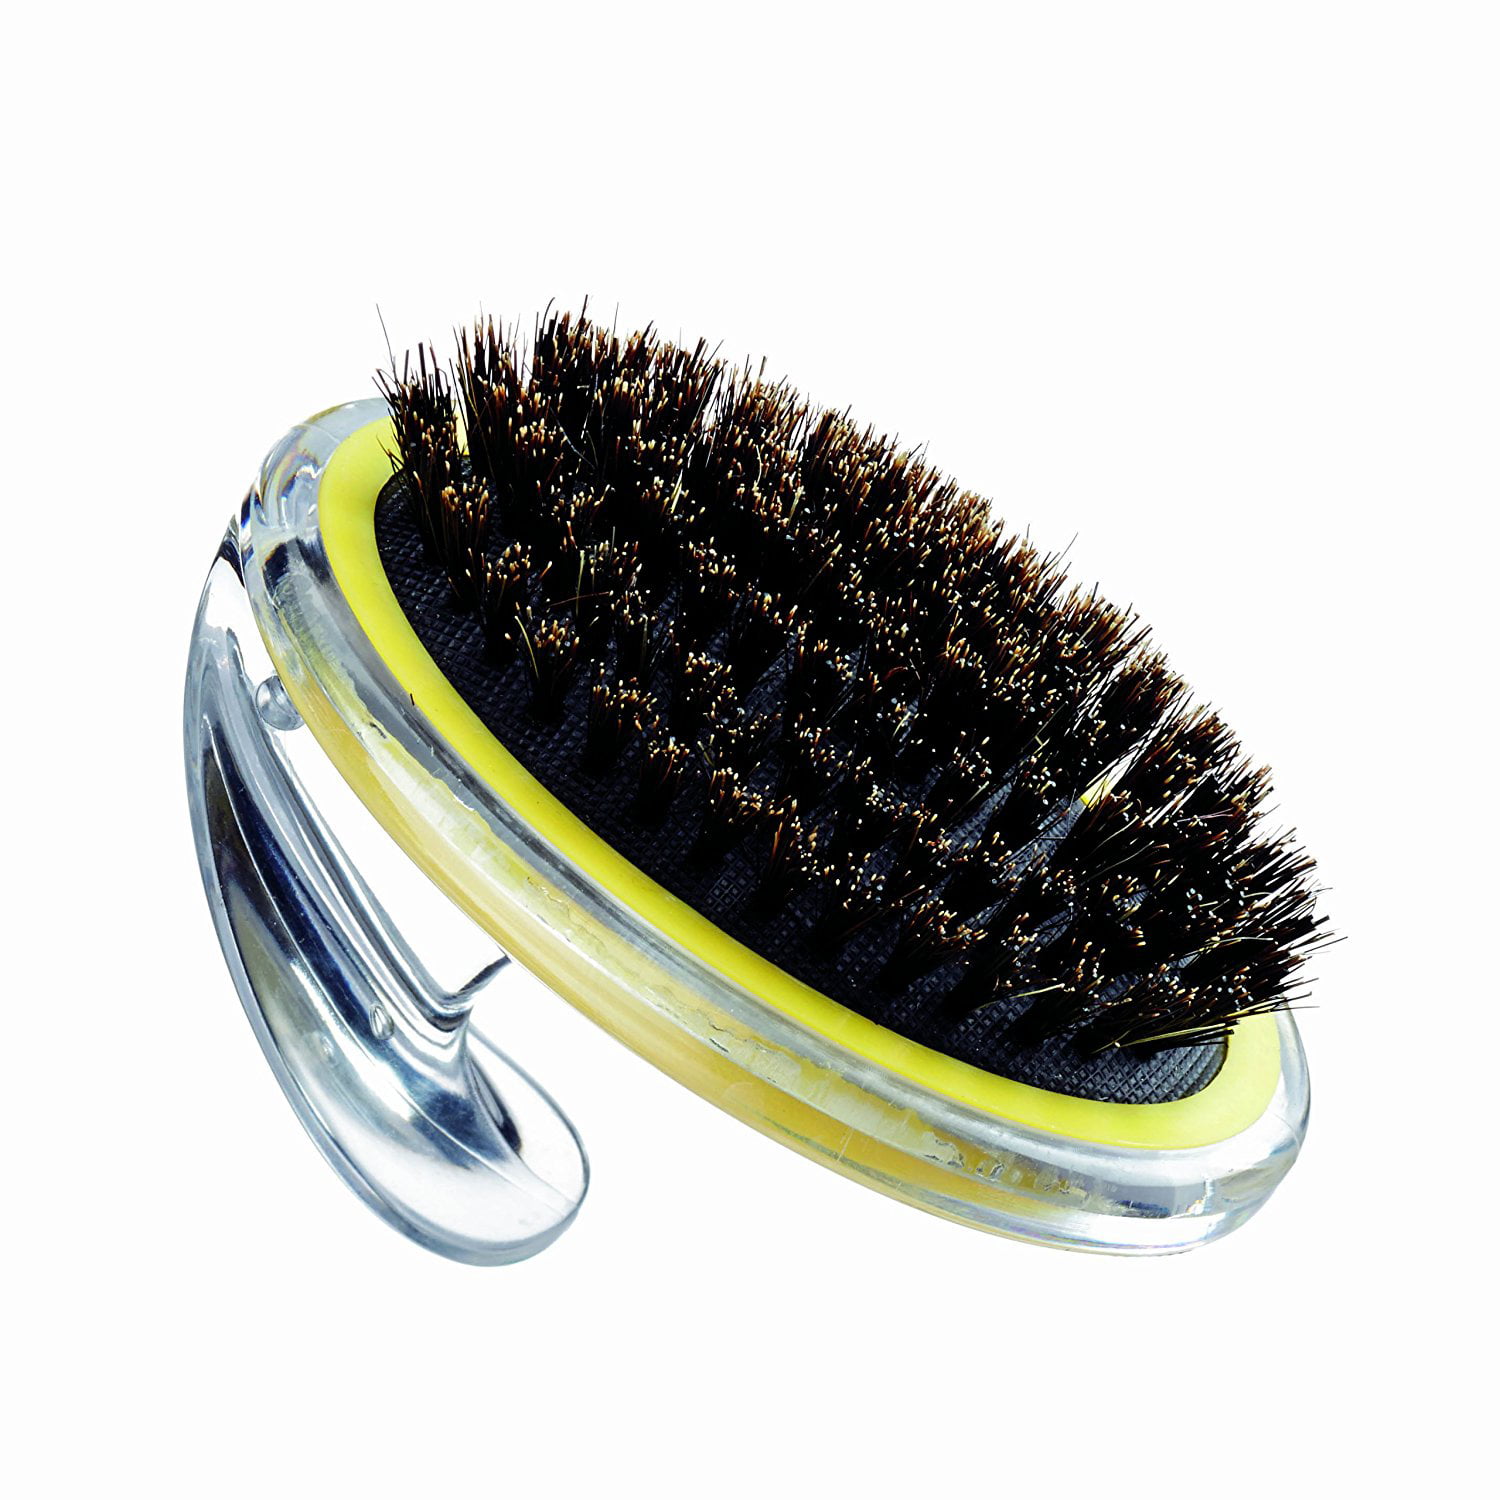 Conair PRODogs PetIt Boar Bristle Brush for Dogs and Pets